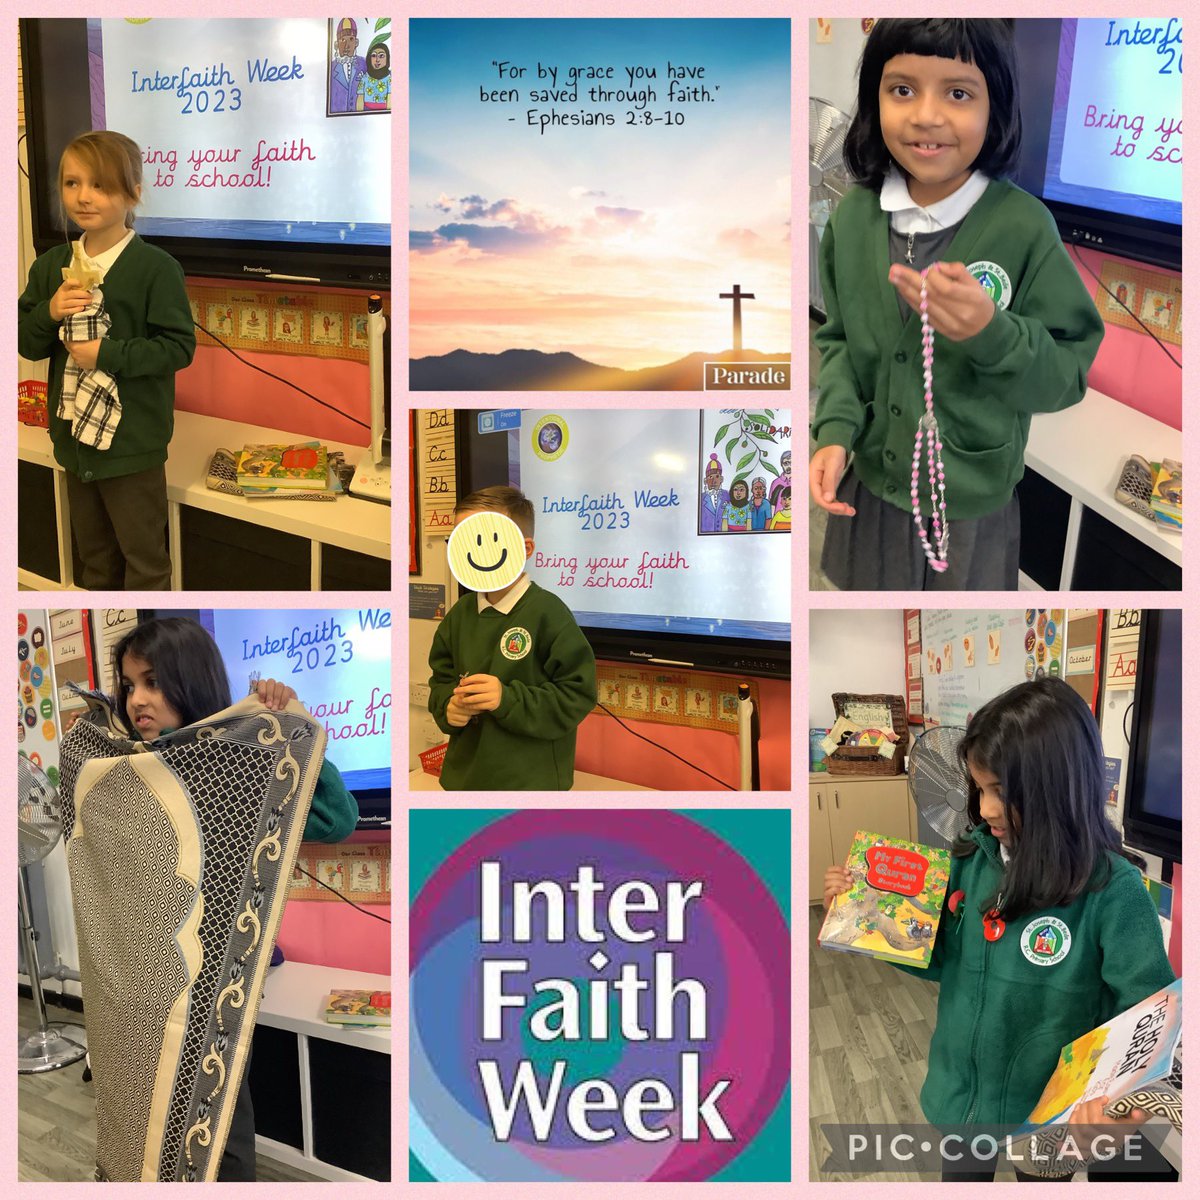 This morning we marked the start of #InterfaithWeek by inviting children to bring their faith to school. We talked about the different beliefs + rituals we have and how we pray to God. A big thank you to the pupils who were so eager to share their faith with us! #sjsbre #sjsbCST